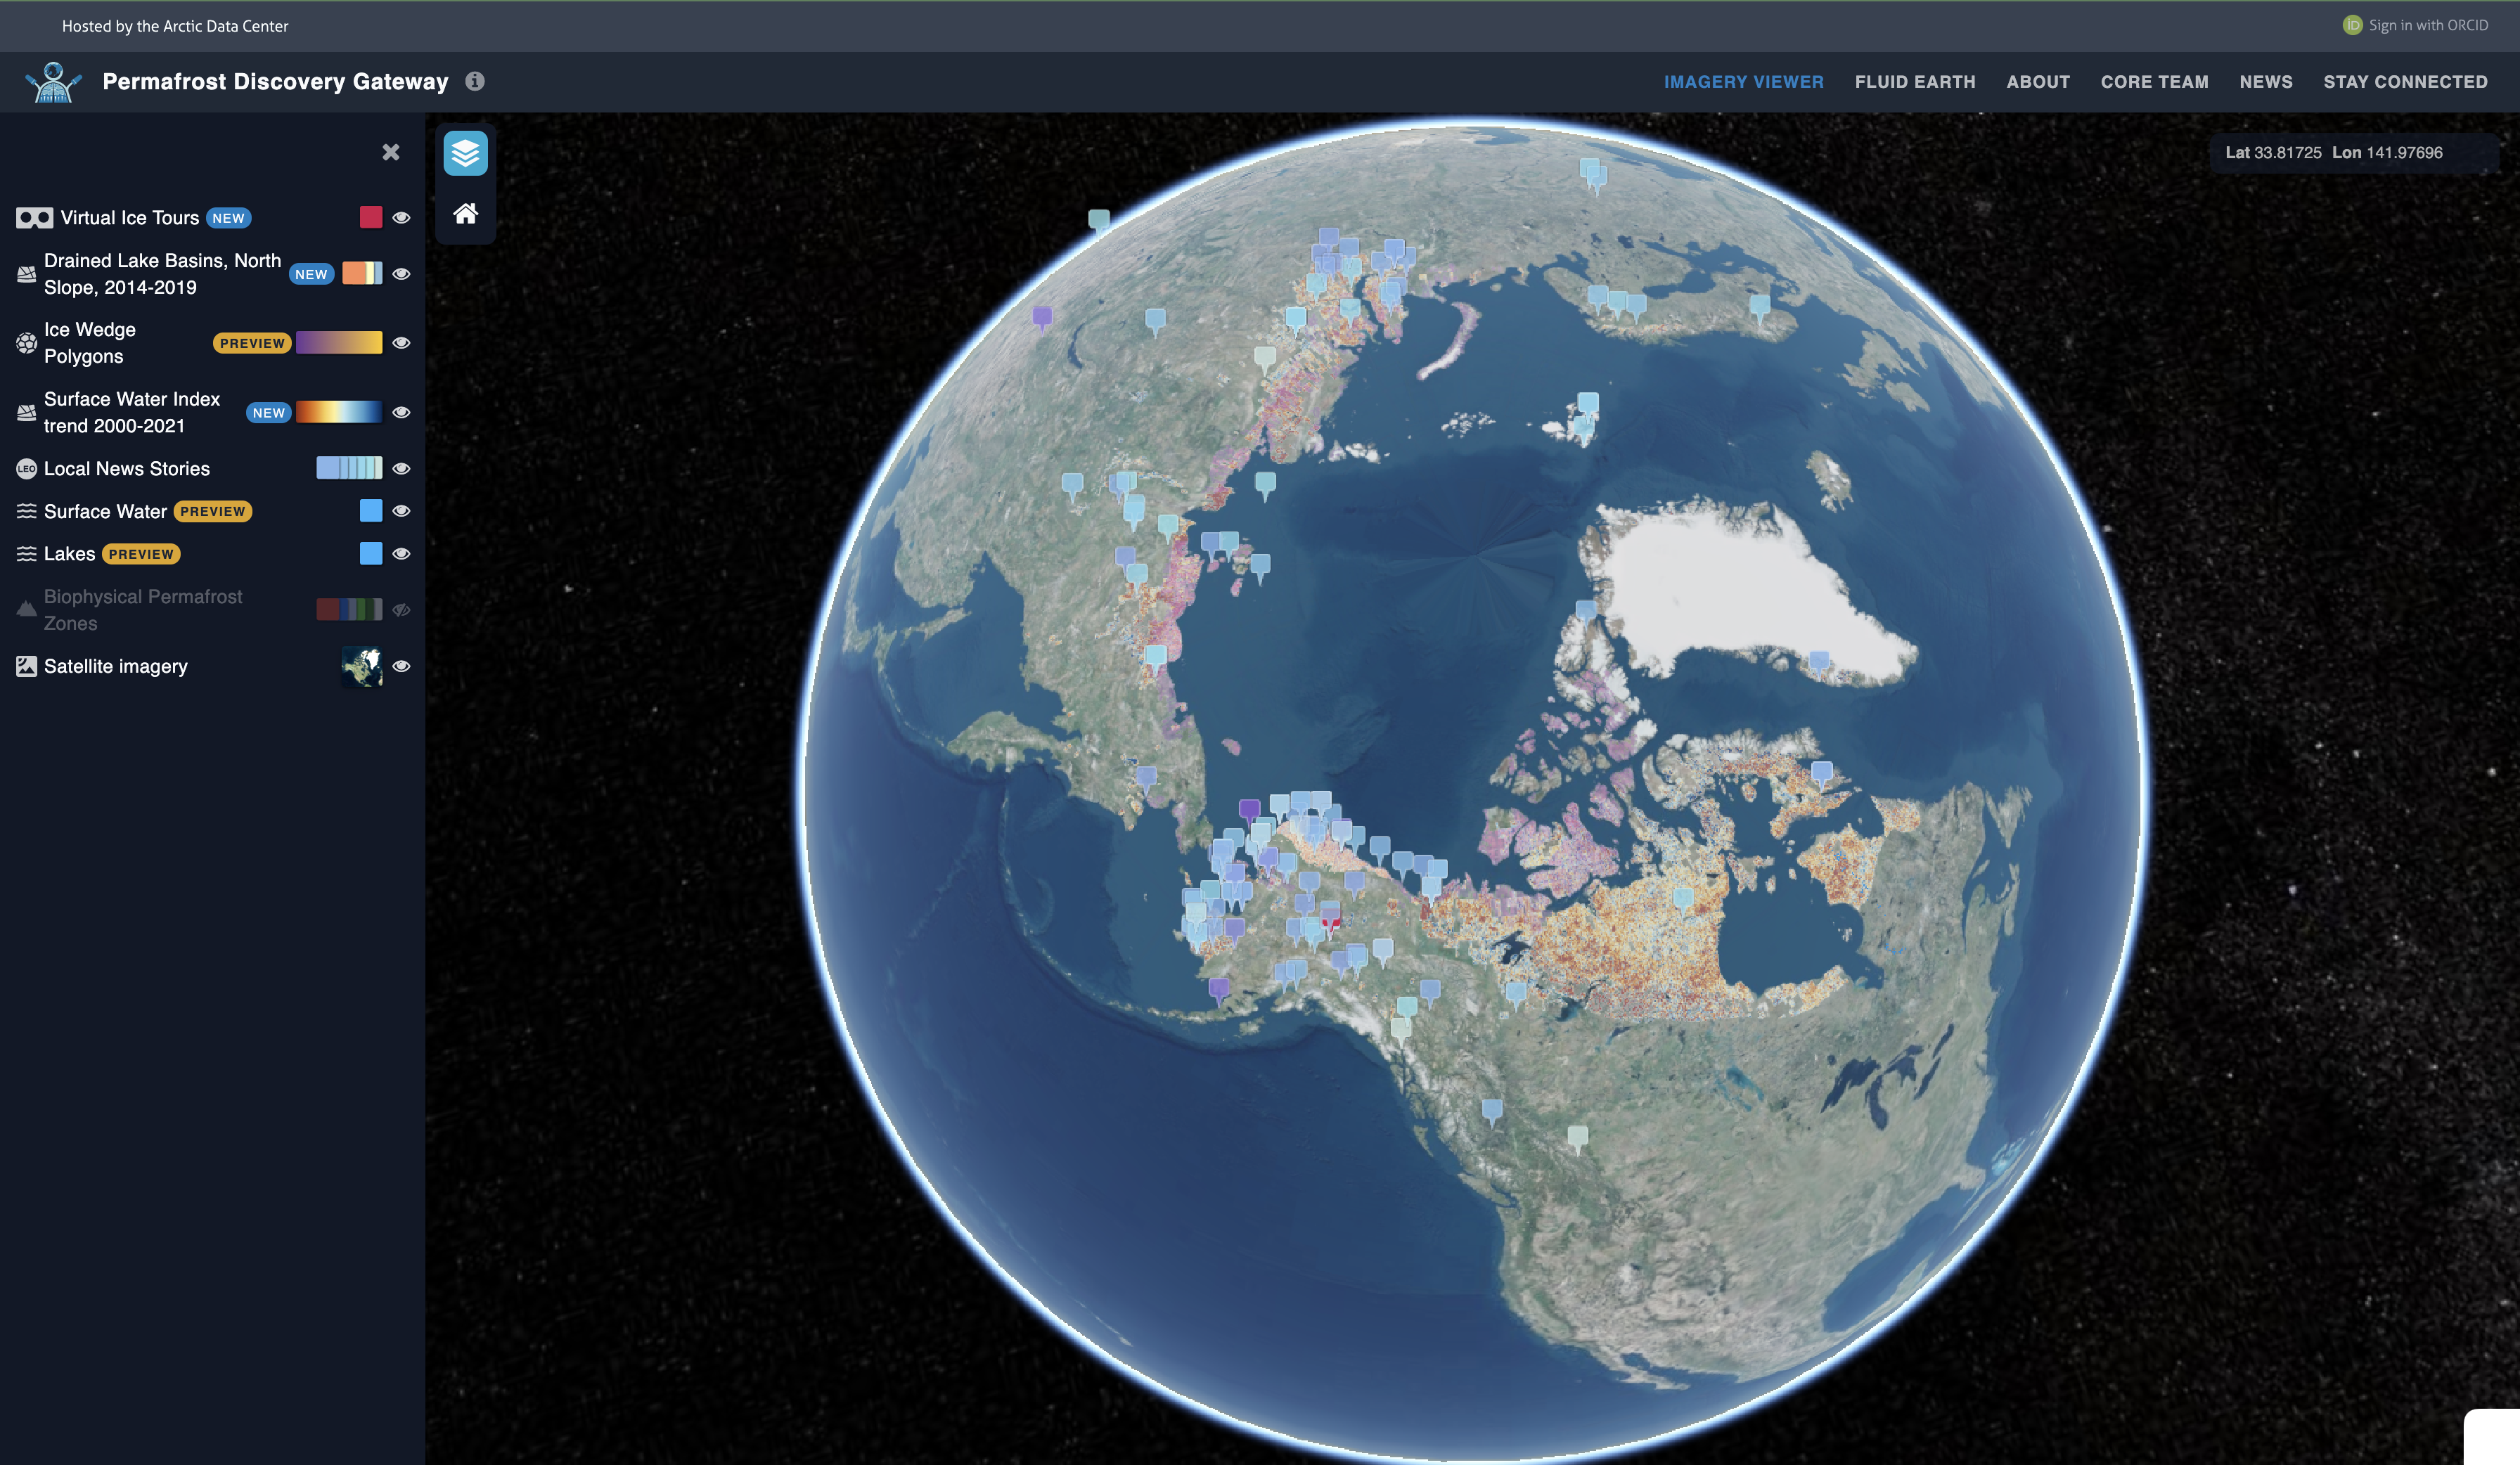 Imagery Viewer with data layers on the Permafrost Discovery Gateway